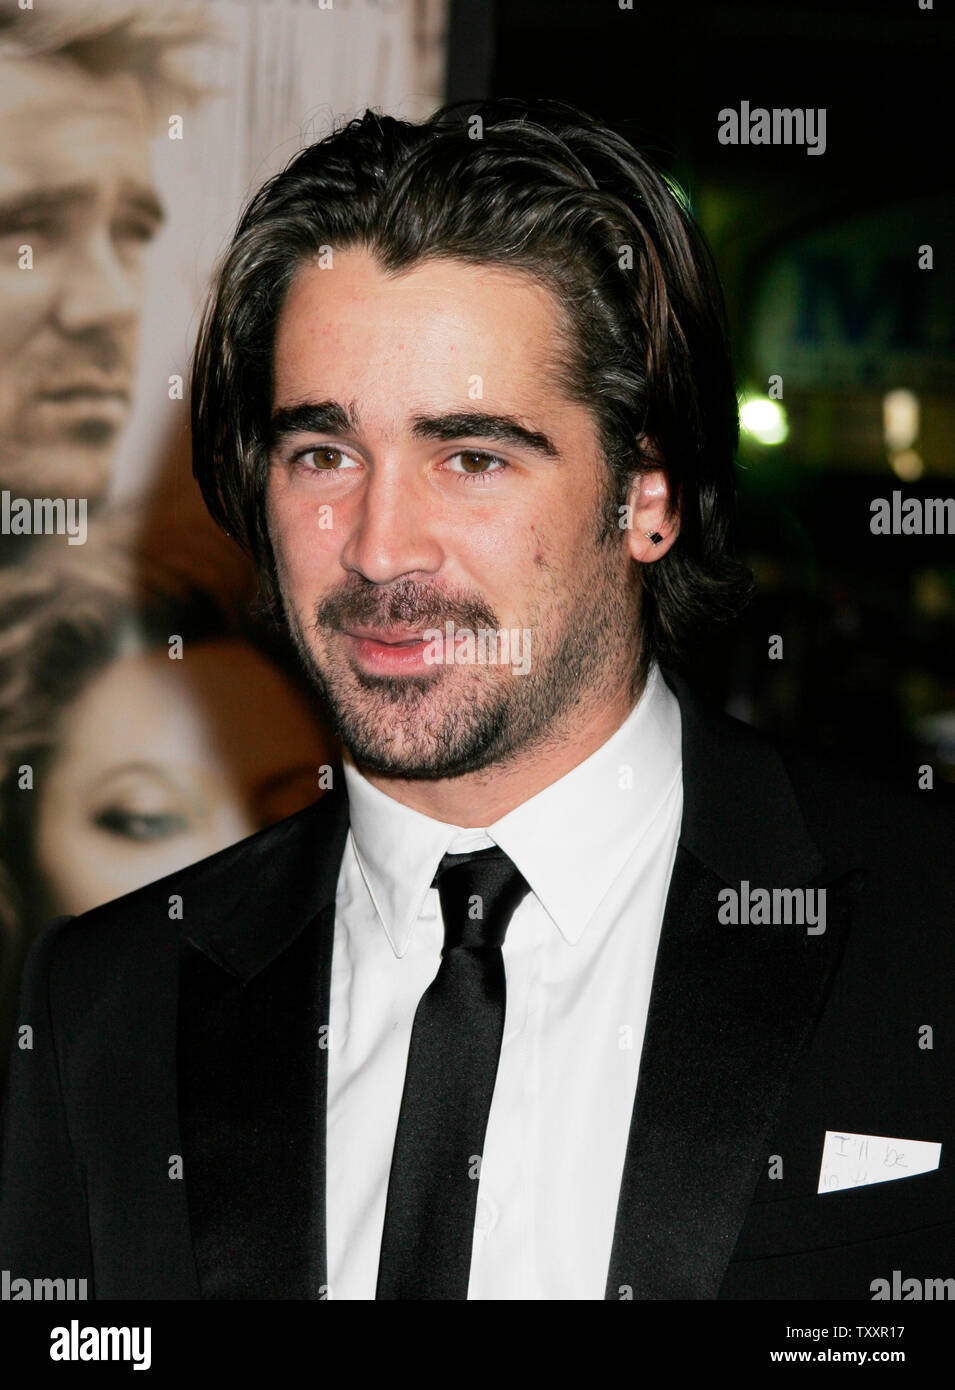 Actor and cast member Colin Farrell arrives at the November 16, 2004 Los Angeles premiere of the film, 'Alexander' at Grauman's Chinese Theatre. The Warner Bros. film will be released in the United States on November 24. (UPI Photo/Francis Specker) Stock Photo